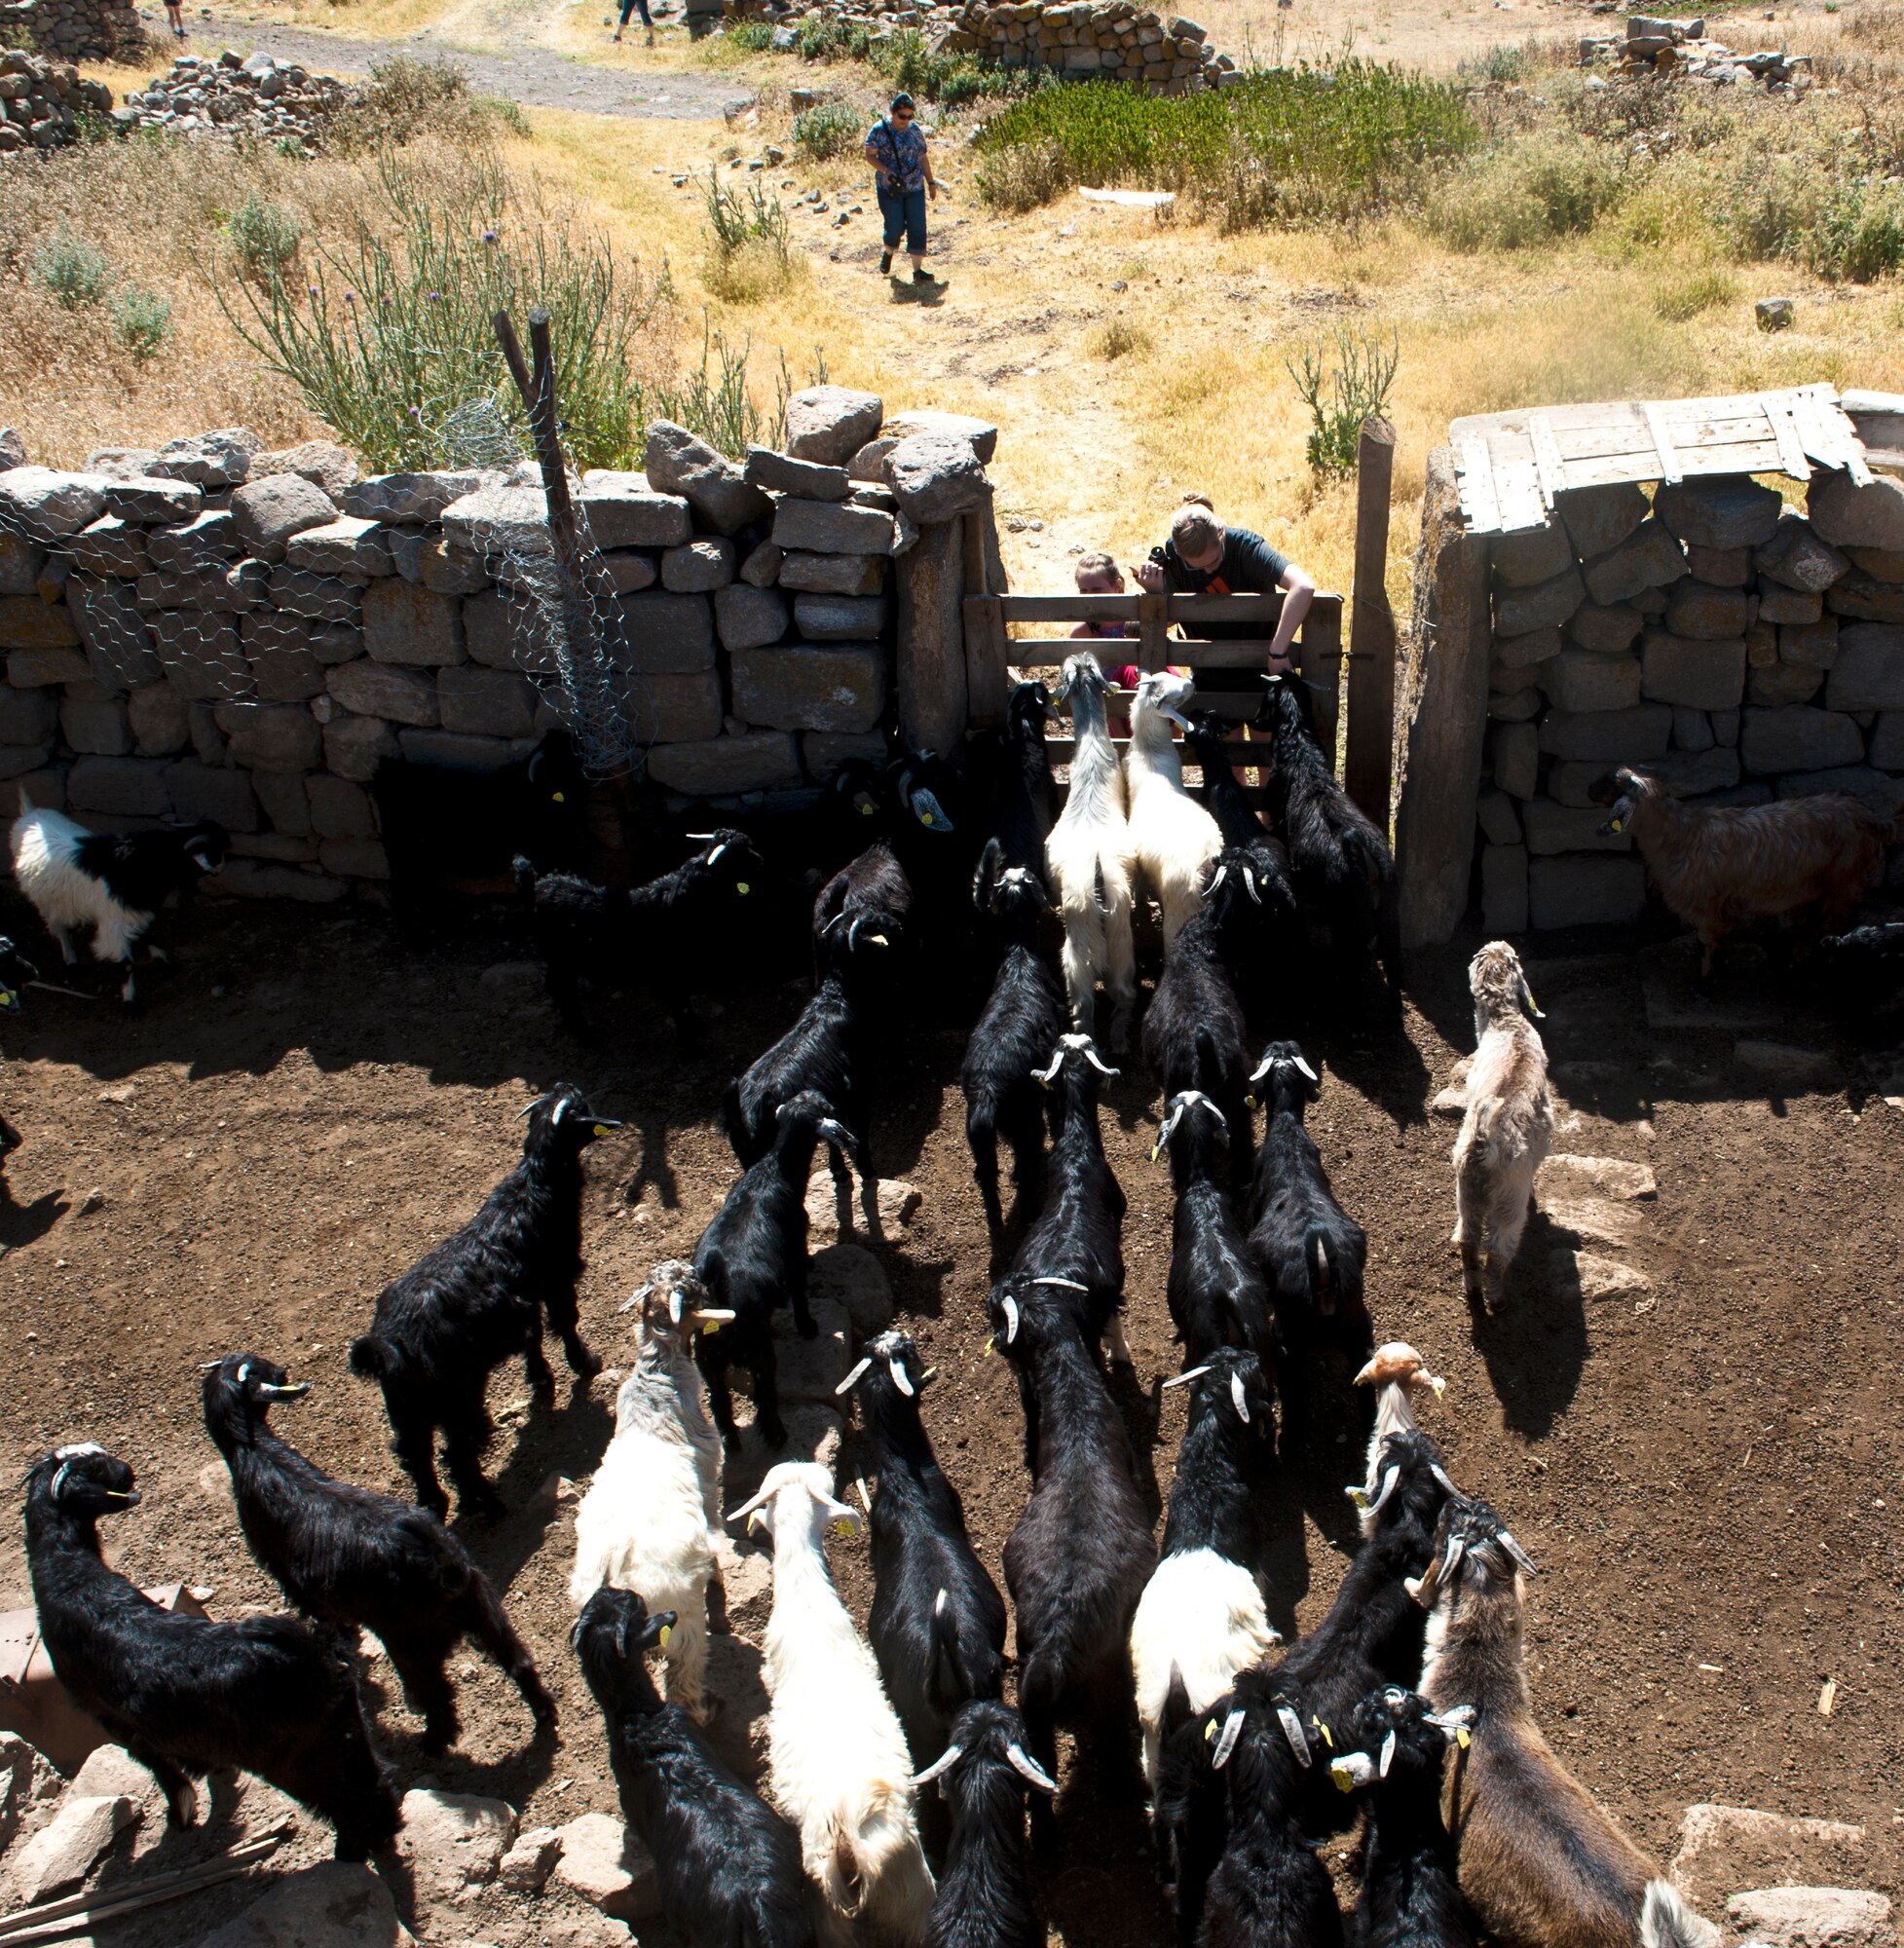 Goats flock to visitors in one of the villages in the Region of 1001 Churches June 31, 2013, Karaman province, Turkey. Old city ruins were used as goat pens and homes in this village. (U.S. Air Force photo by Senior Airman Daniel Phelps/Released)